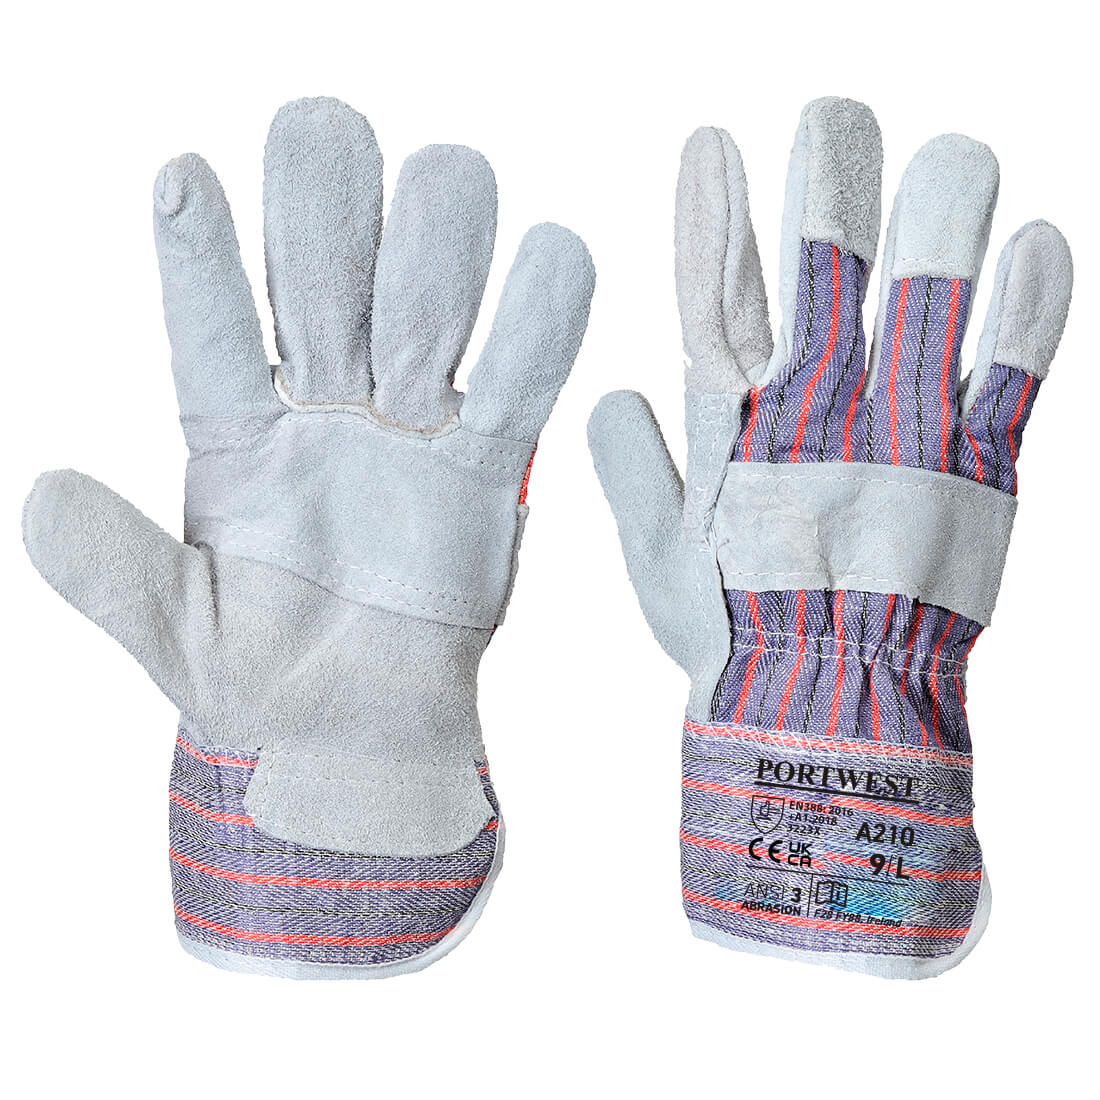 A210 Portwest® Canadian Cow Leather Rigger Work Gloves with Cotton Backs